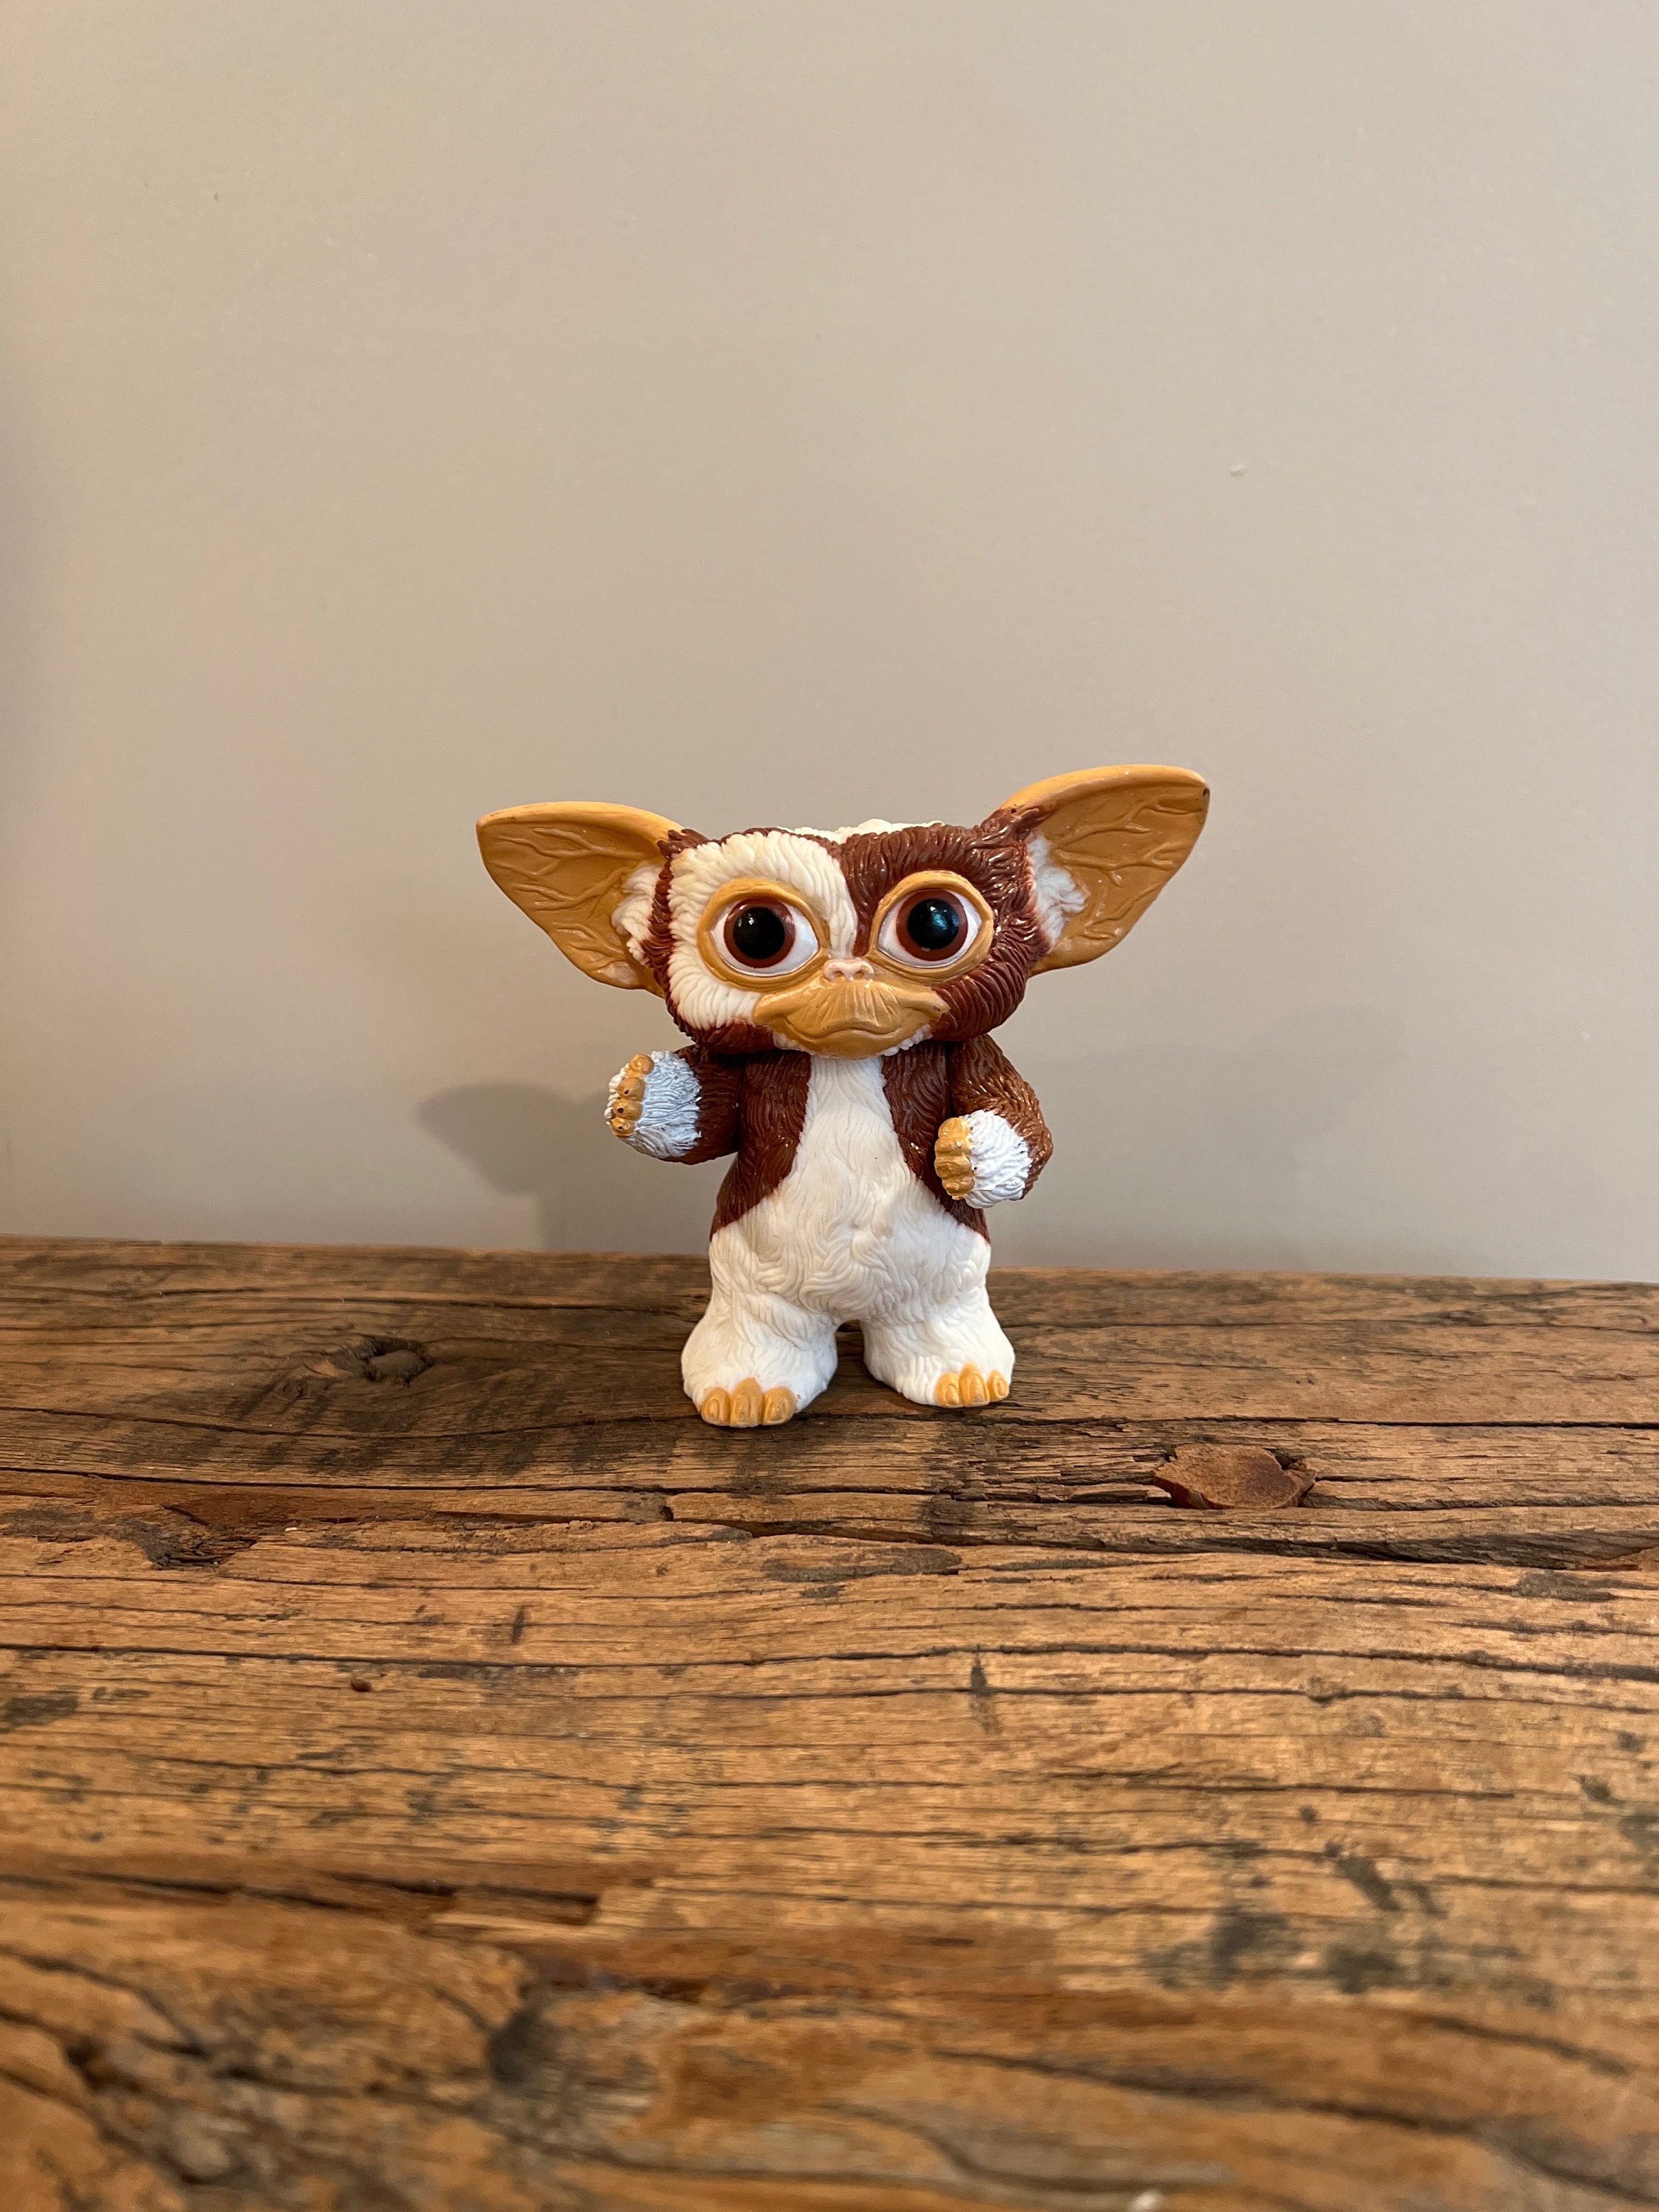 Gremlins Toy Gizmo, Mogwai 3.5 Warner Bros Toys, Movie Collectablle Vintage  Gremlins, Movie Gizmo Poseable Figure Gremlin Gifts Christmas -  India